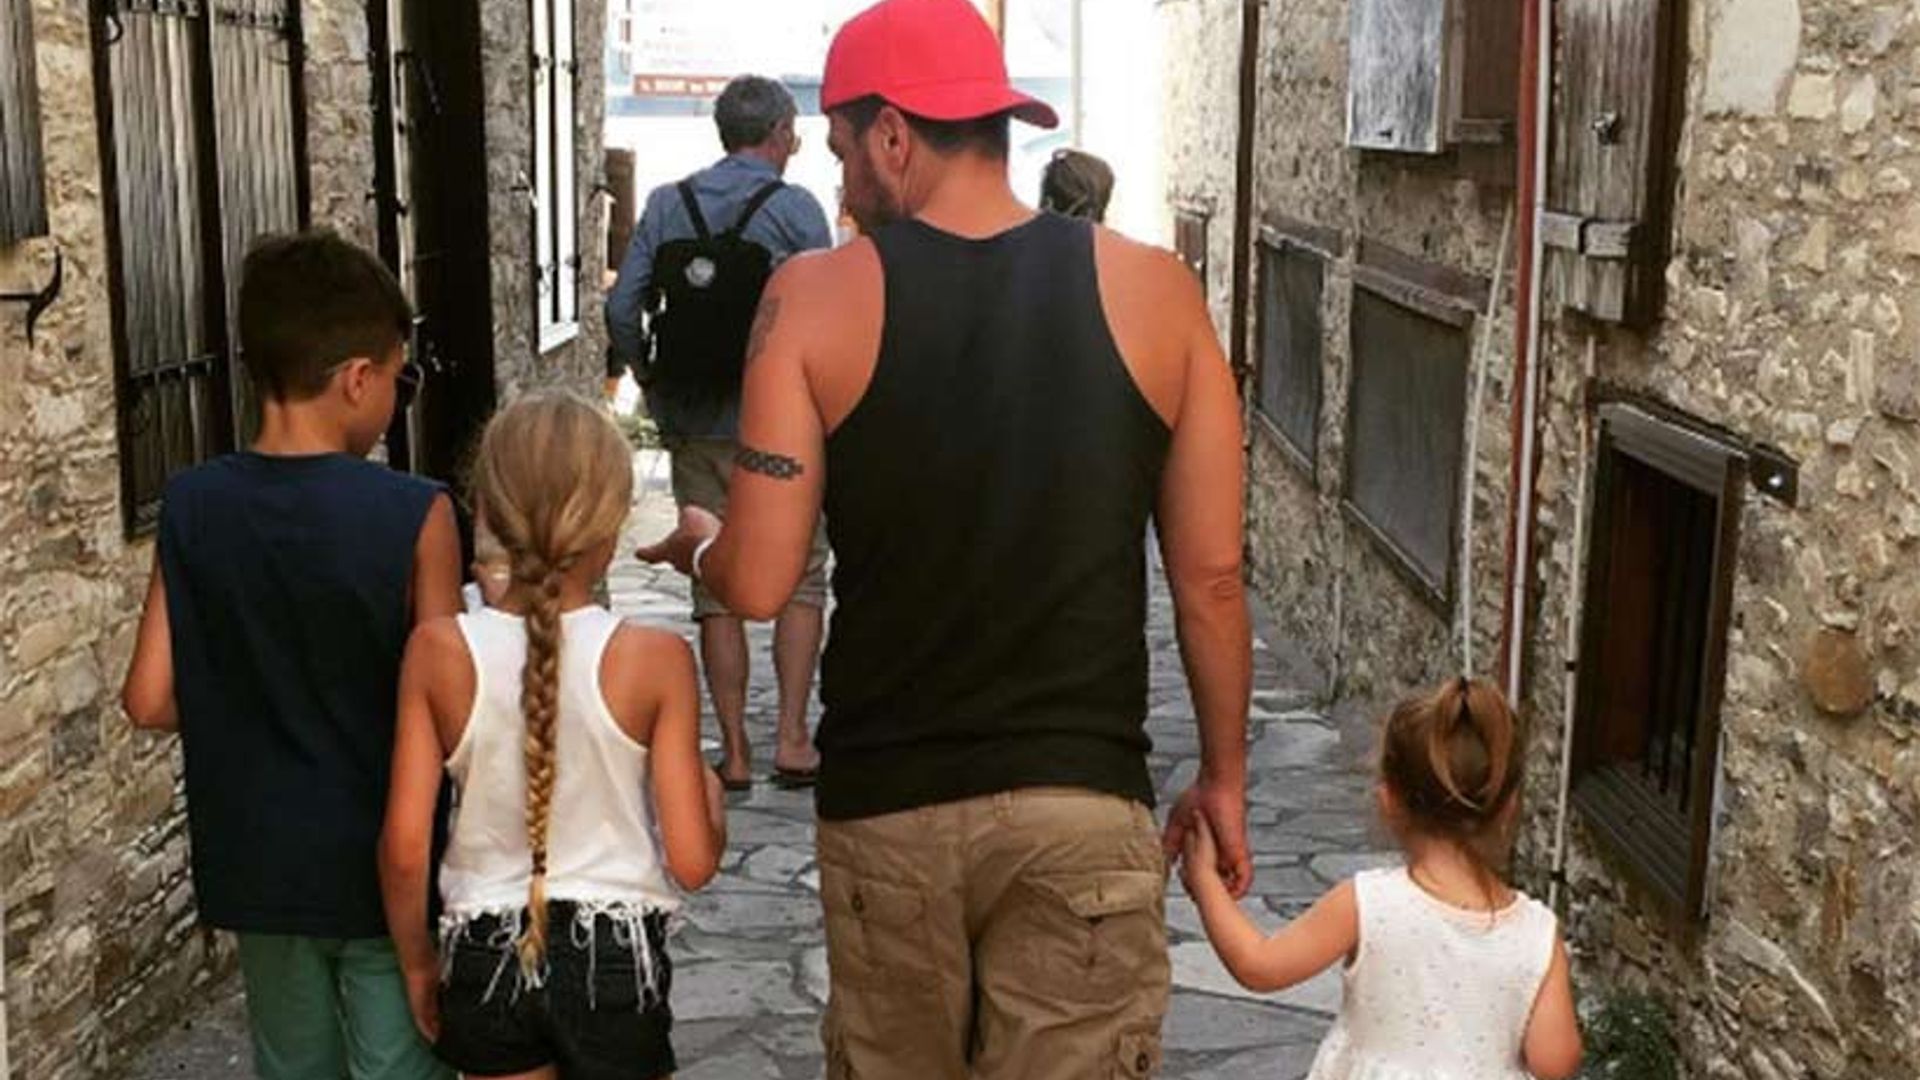 Peter Andre discusses his 'strict' parenting style: 'That's just my way of doing it'